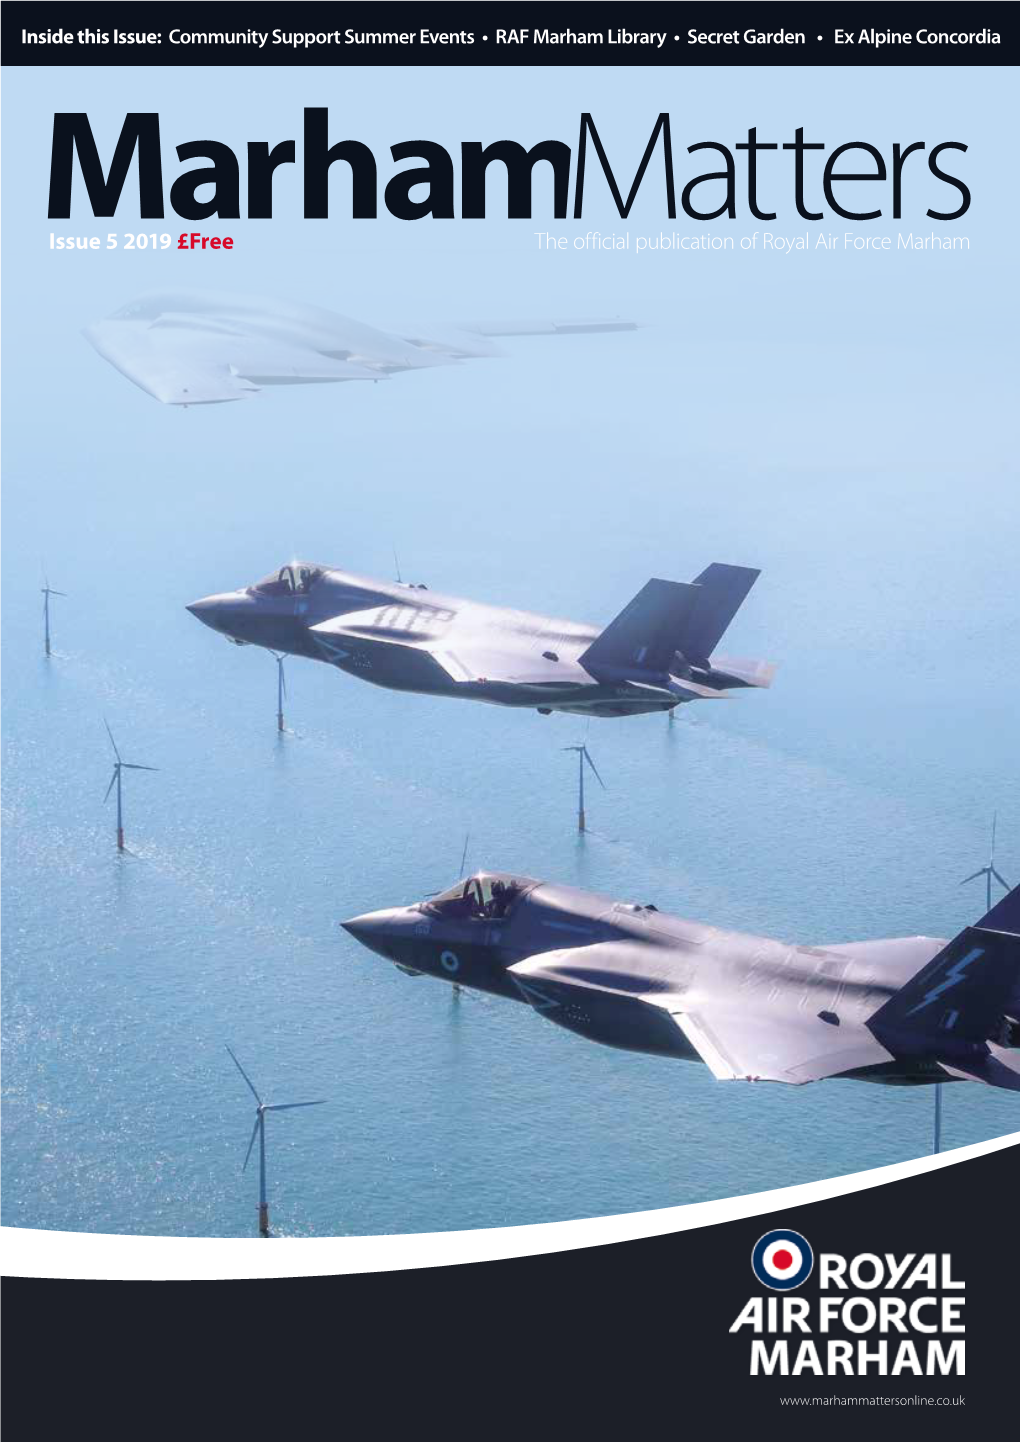 Issue 5 2019 £Free the Official Publication of Royal Air Force Marham